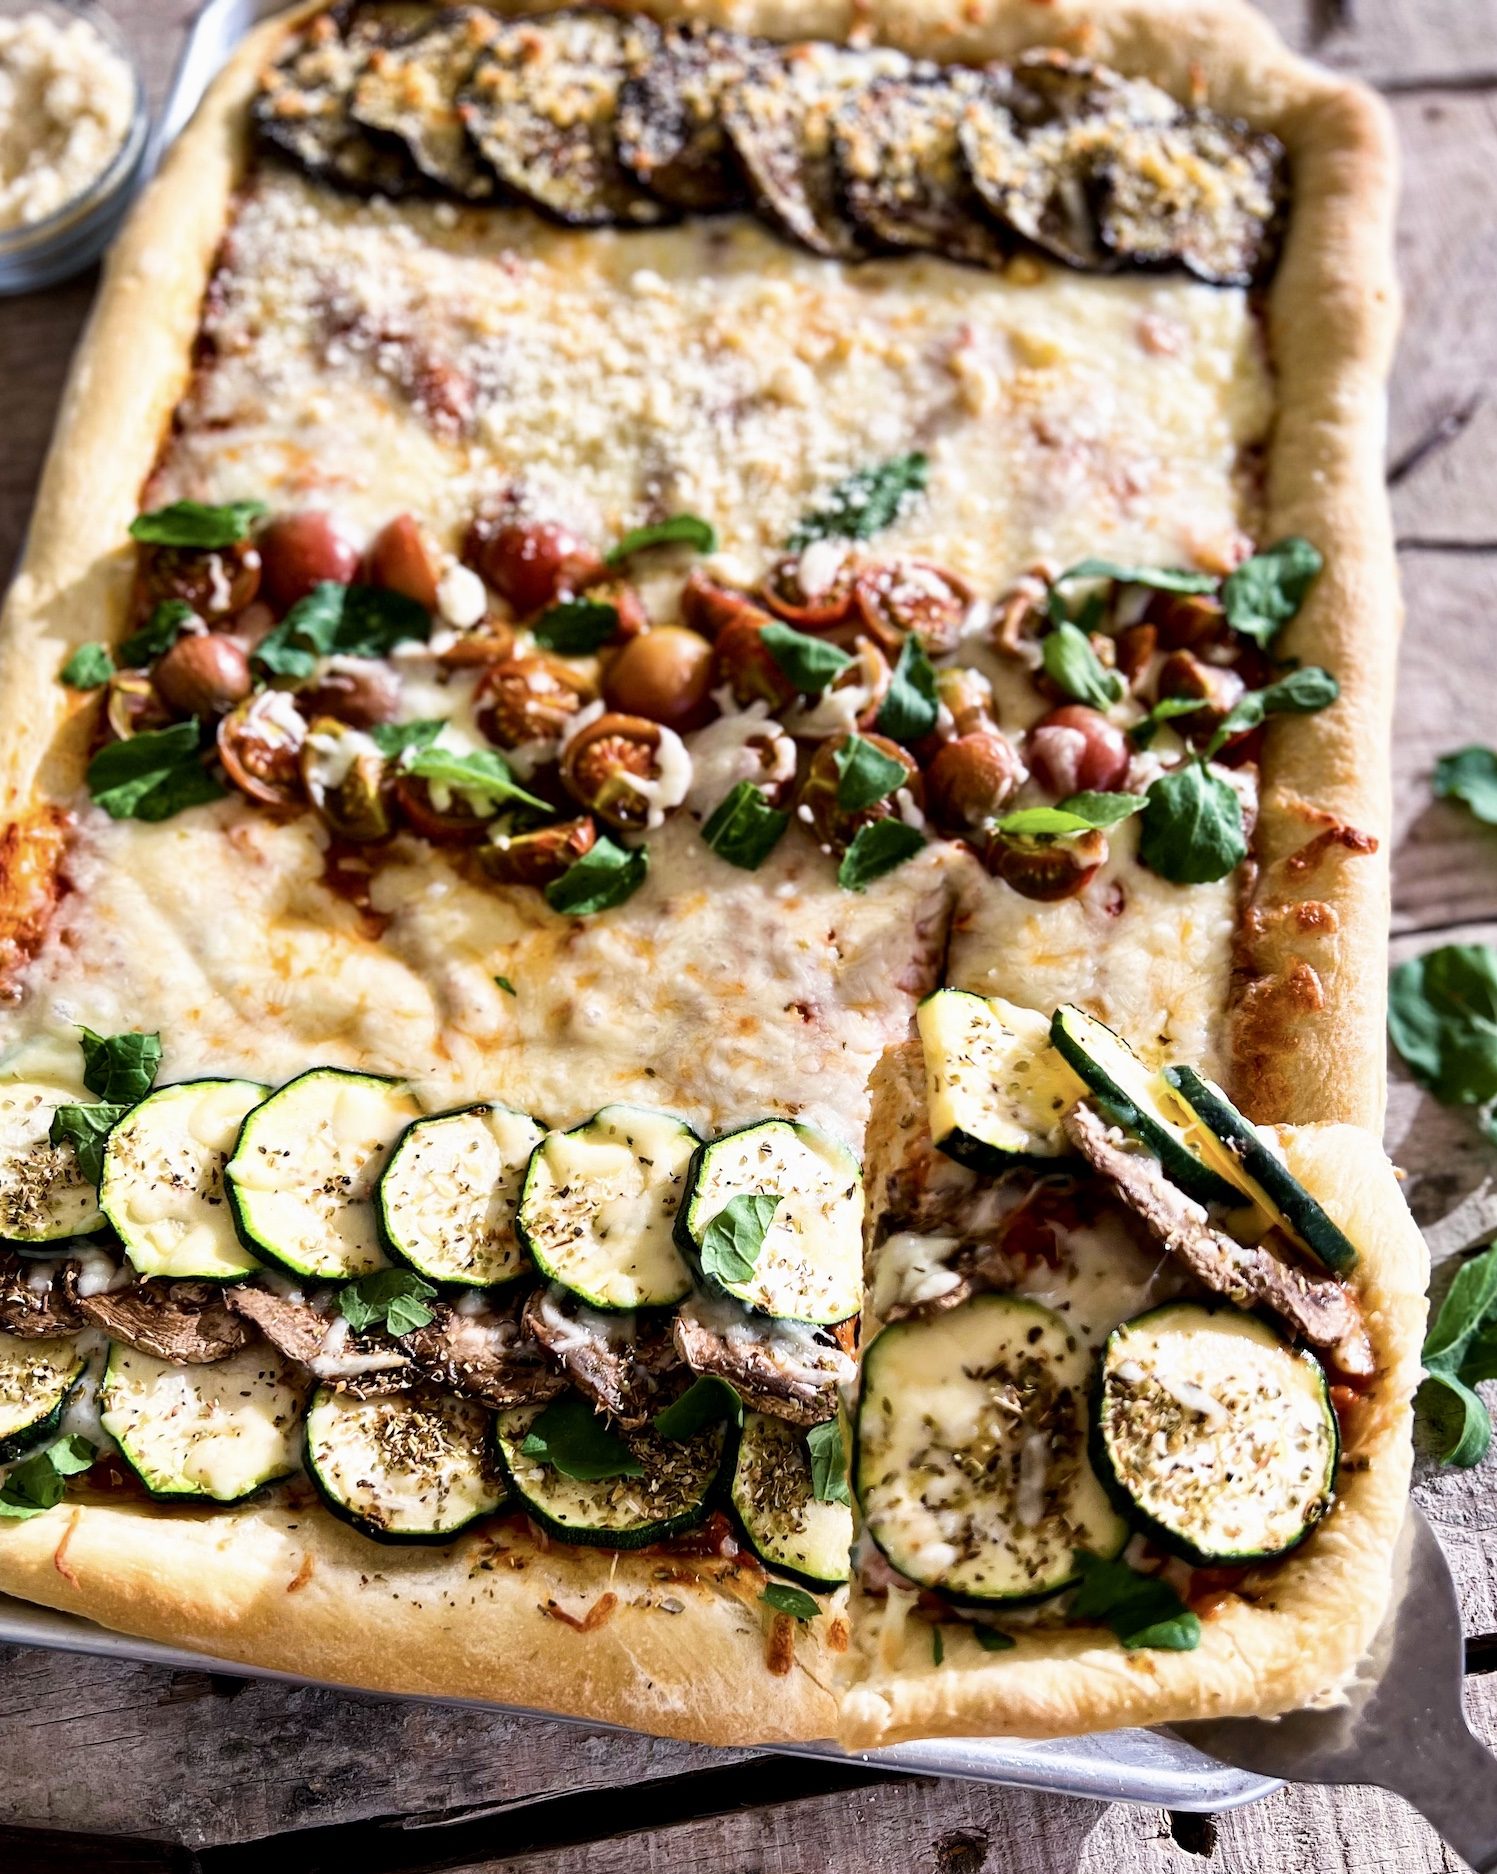 https://www.familicious.net/wp-content/uploads/2022/03/a-square-cut-off-the-family-sheet-pan-pizza-e1647716062159.jpg